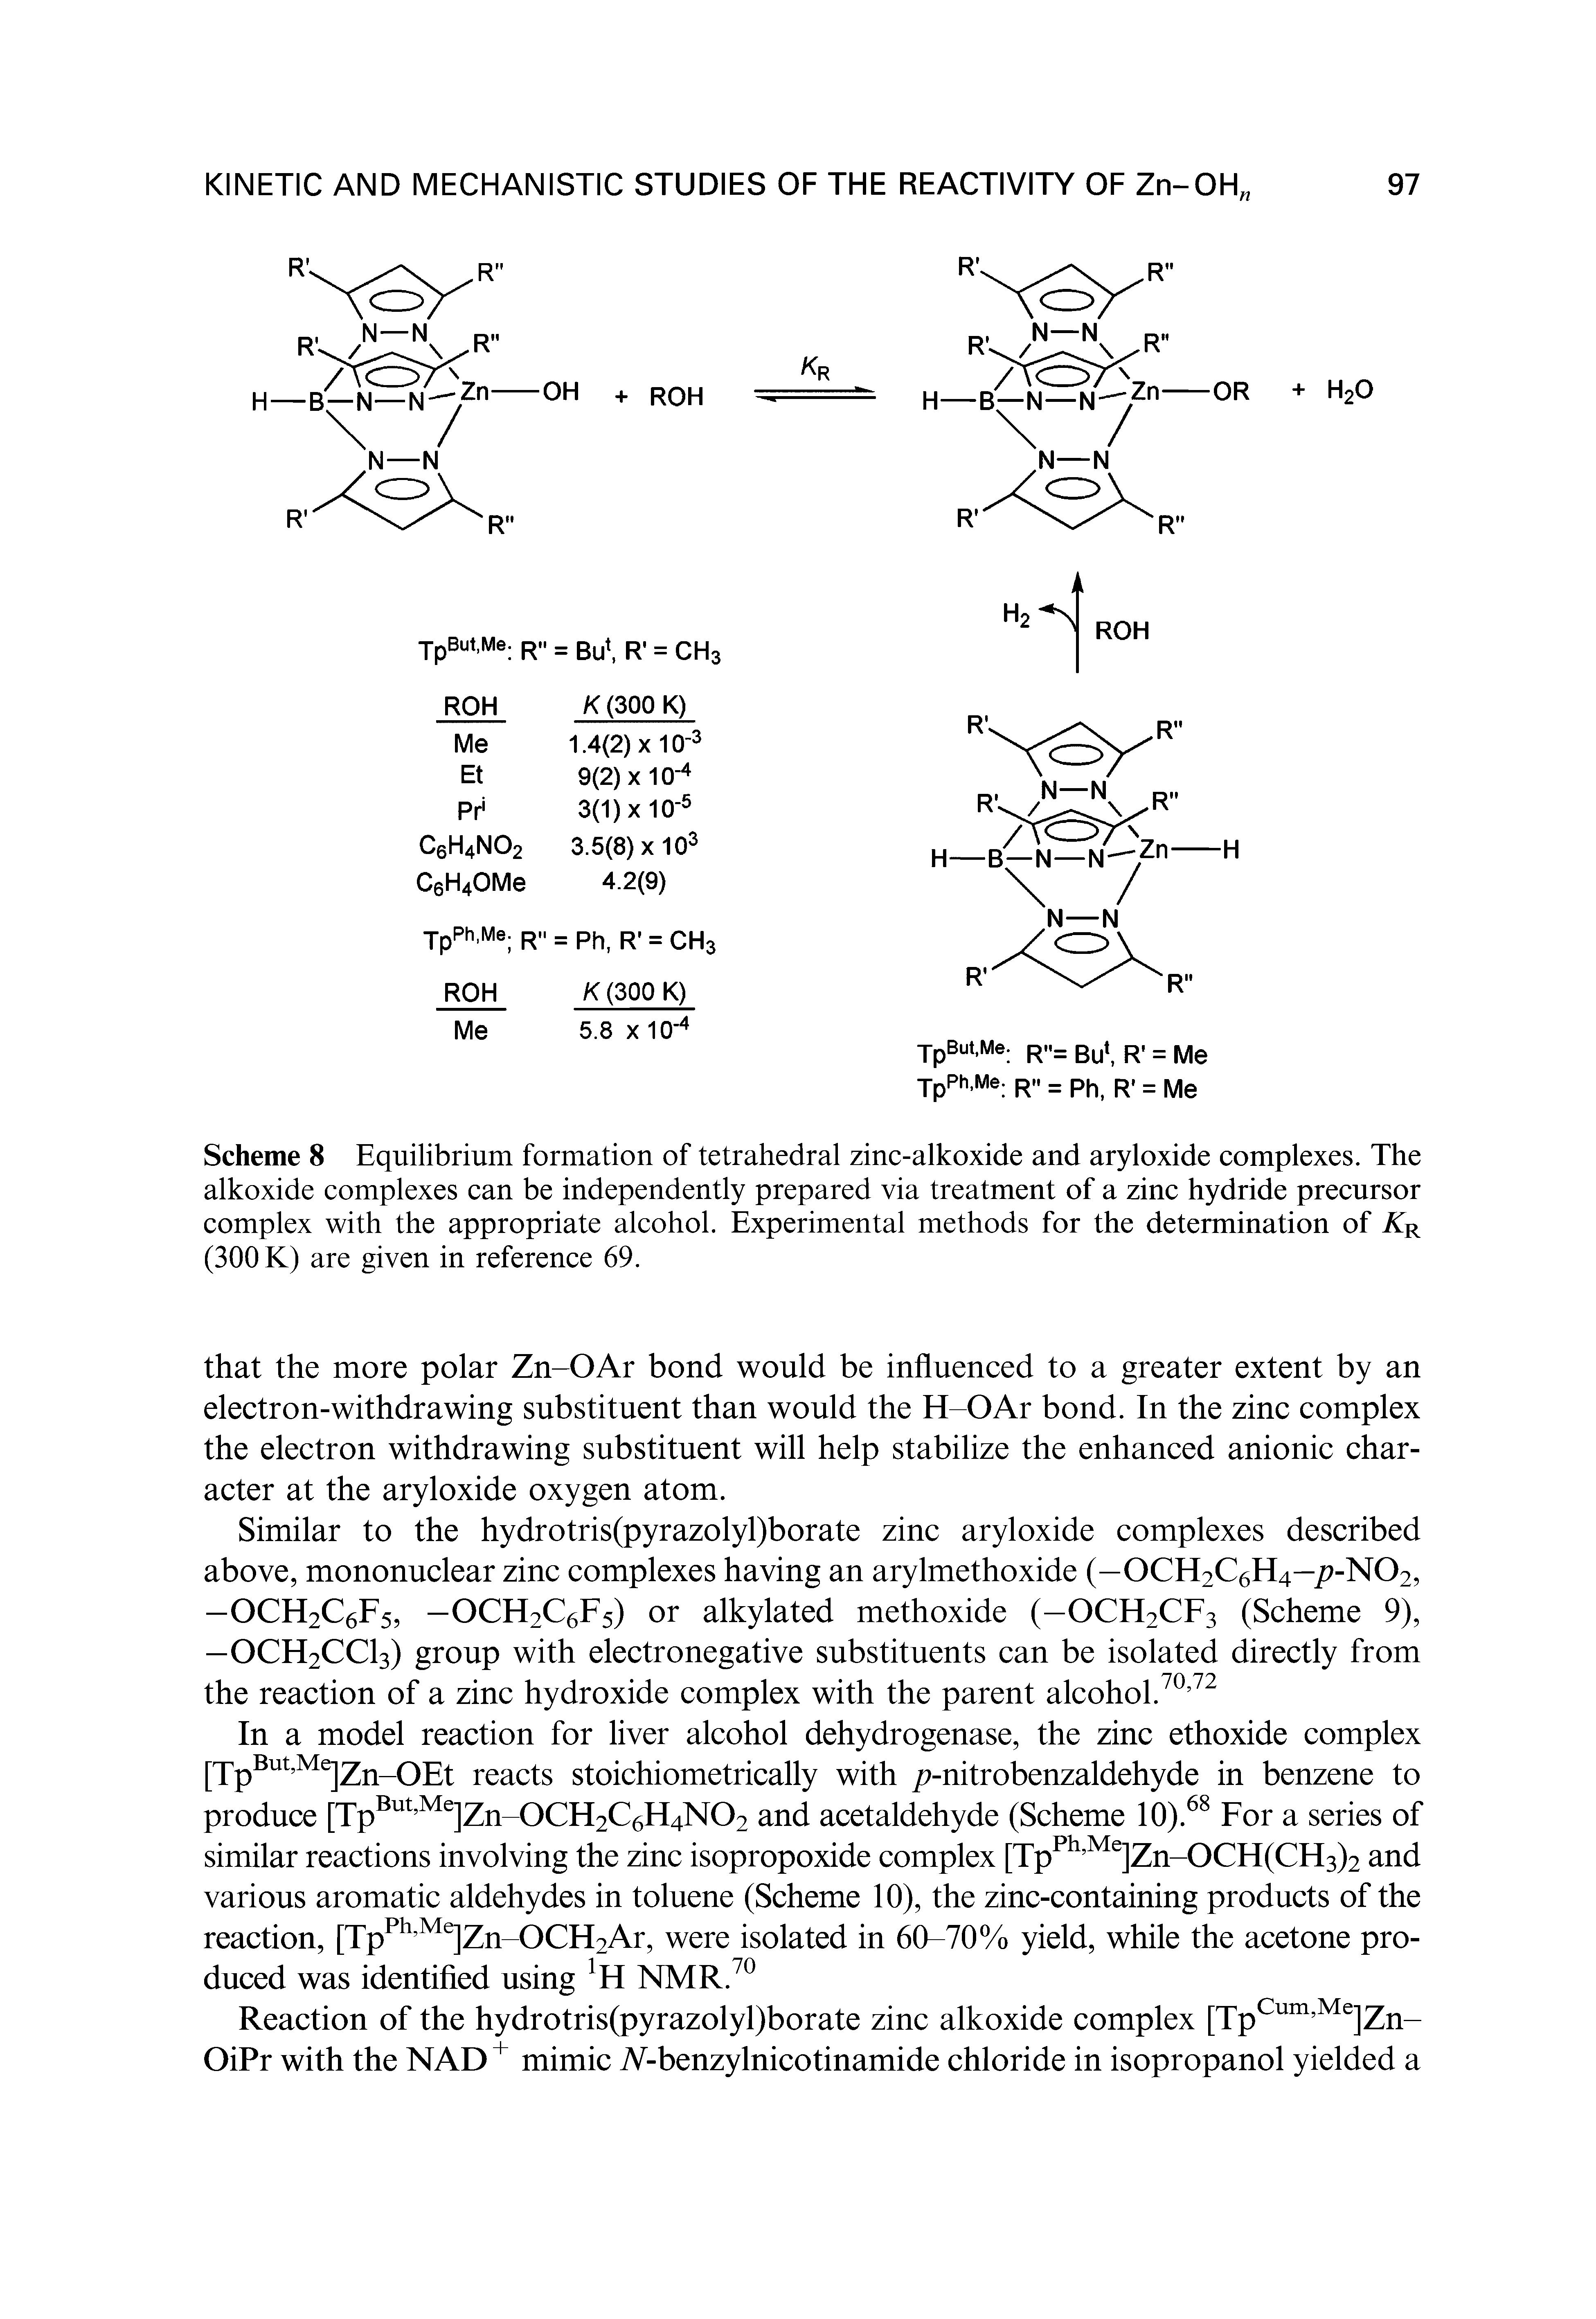 Scheme 8 Equilibrium formation of tetrahedral zinc-alkoxide and aryloxide complexes. The alkoxide complexes can be independently prepared via treatment of a zinc hydride precursor complex with the appropriate alcohol. Experimental methods for the determination of Kk (300 K) are given in reference 69.